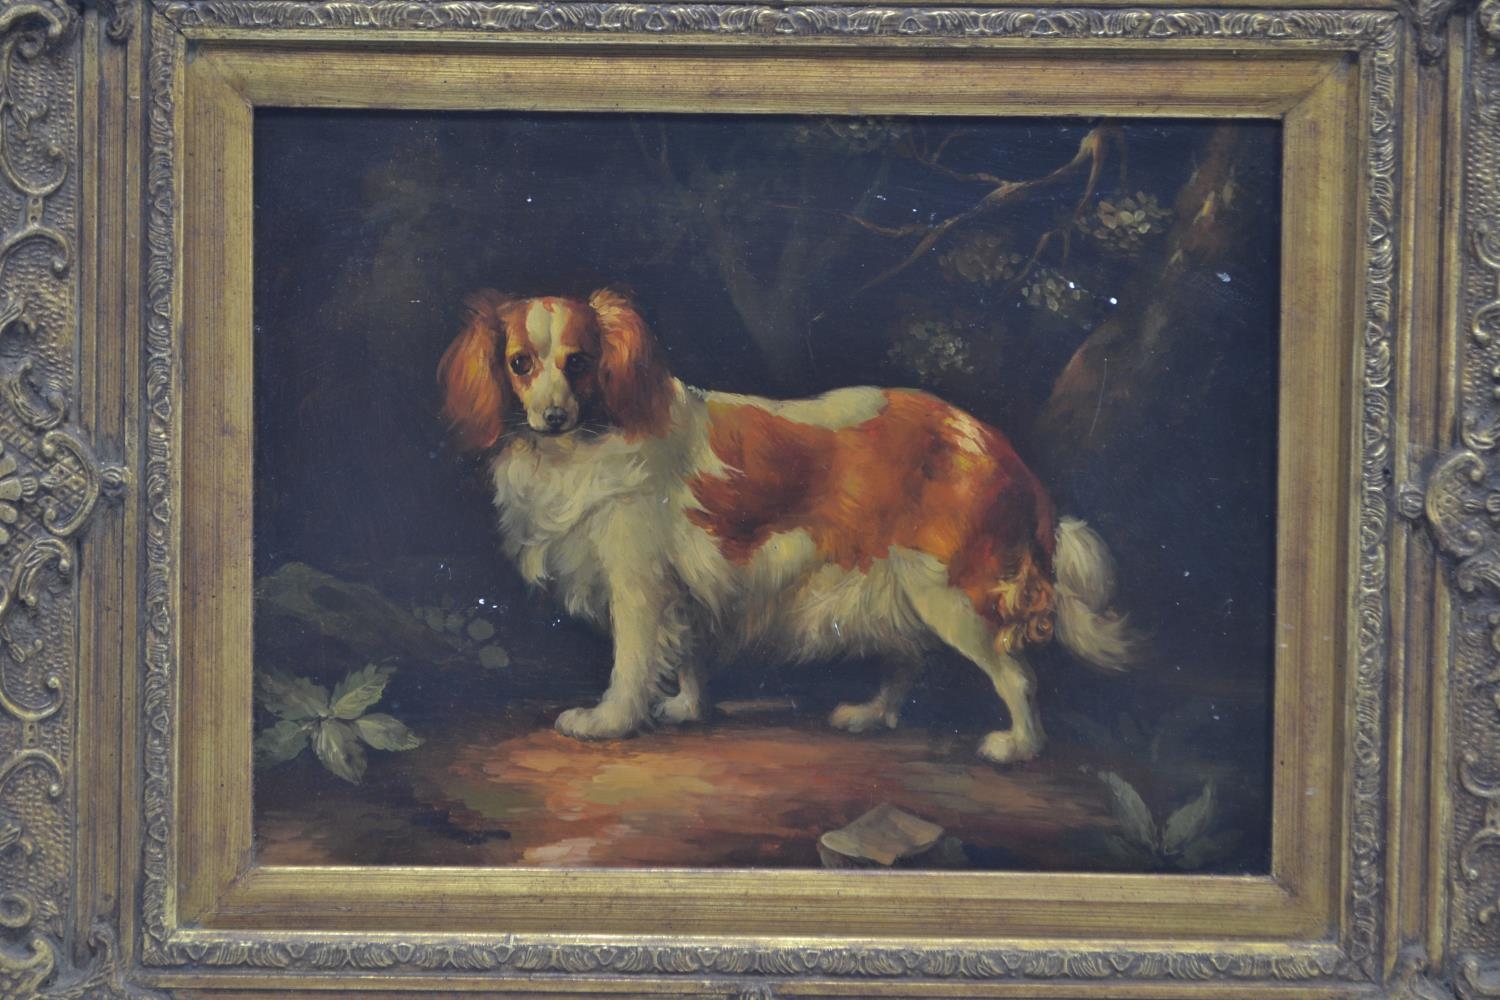 C19 oil on board of a spaniel standing, in an ornate gilt frame. 65cm x 55xm inclusive of frame  - Image 2 of 2